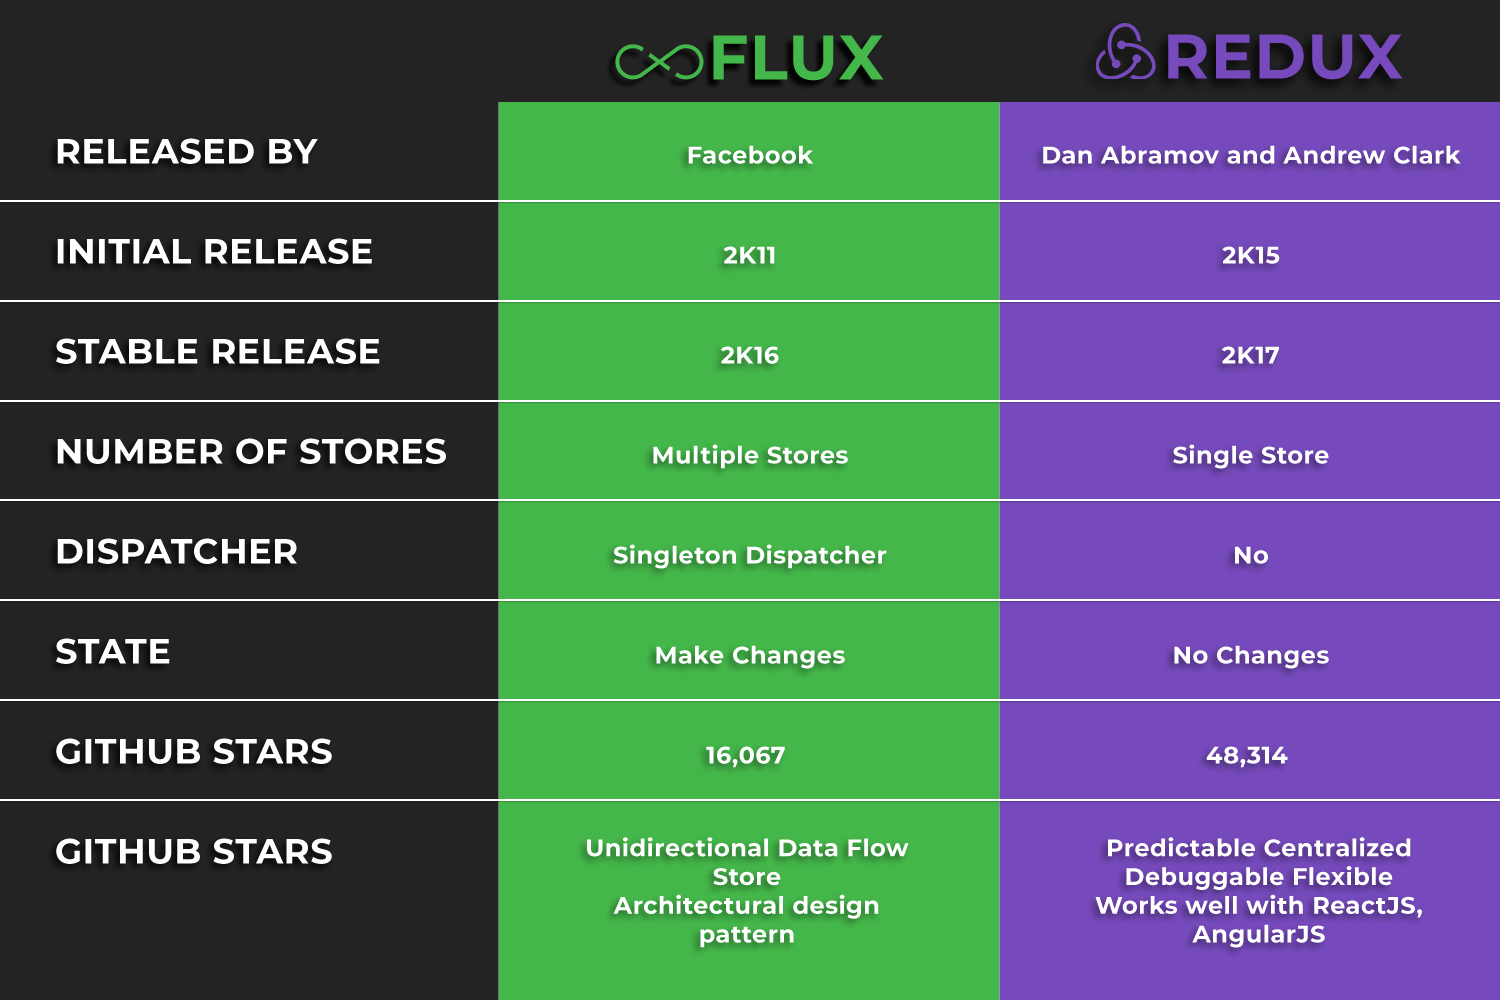 Flux Redux: 9 Sites of Experimentation in Stocks and Flows